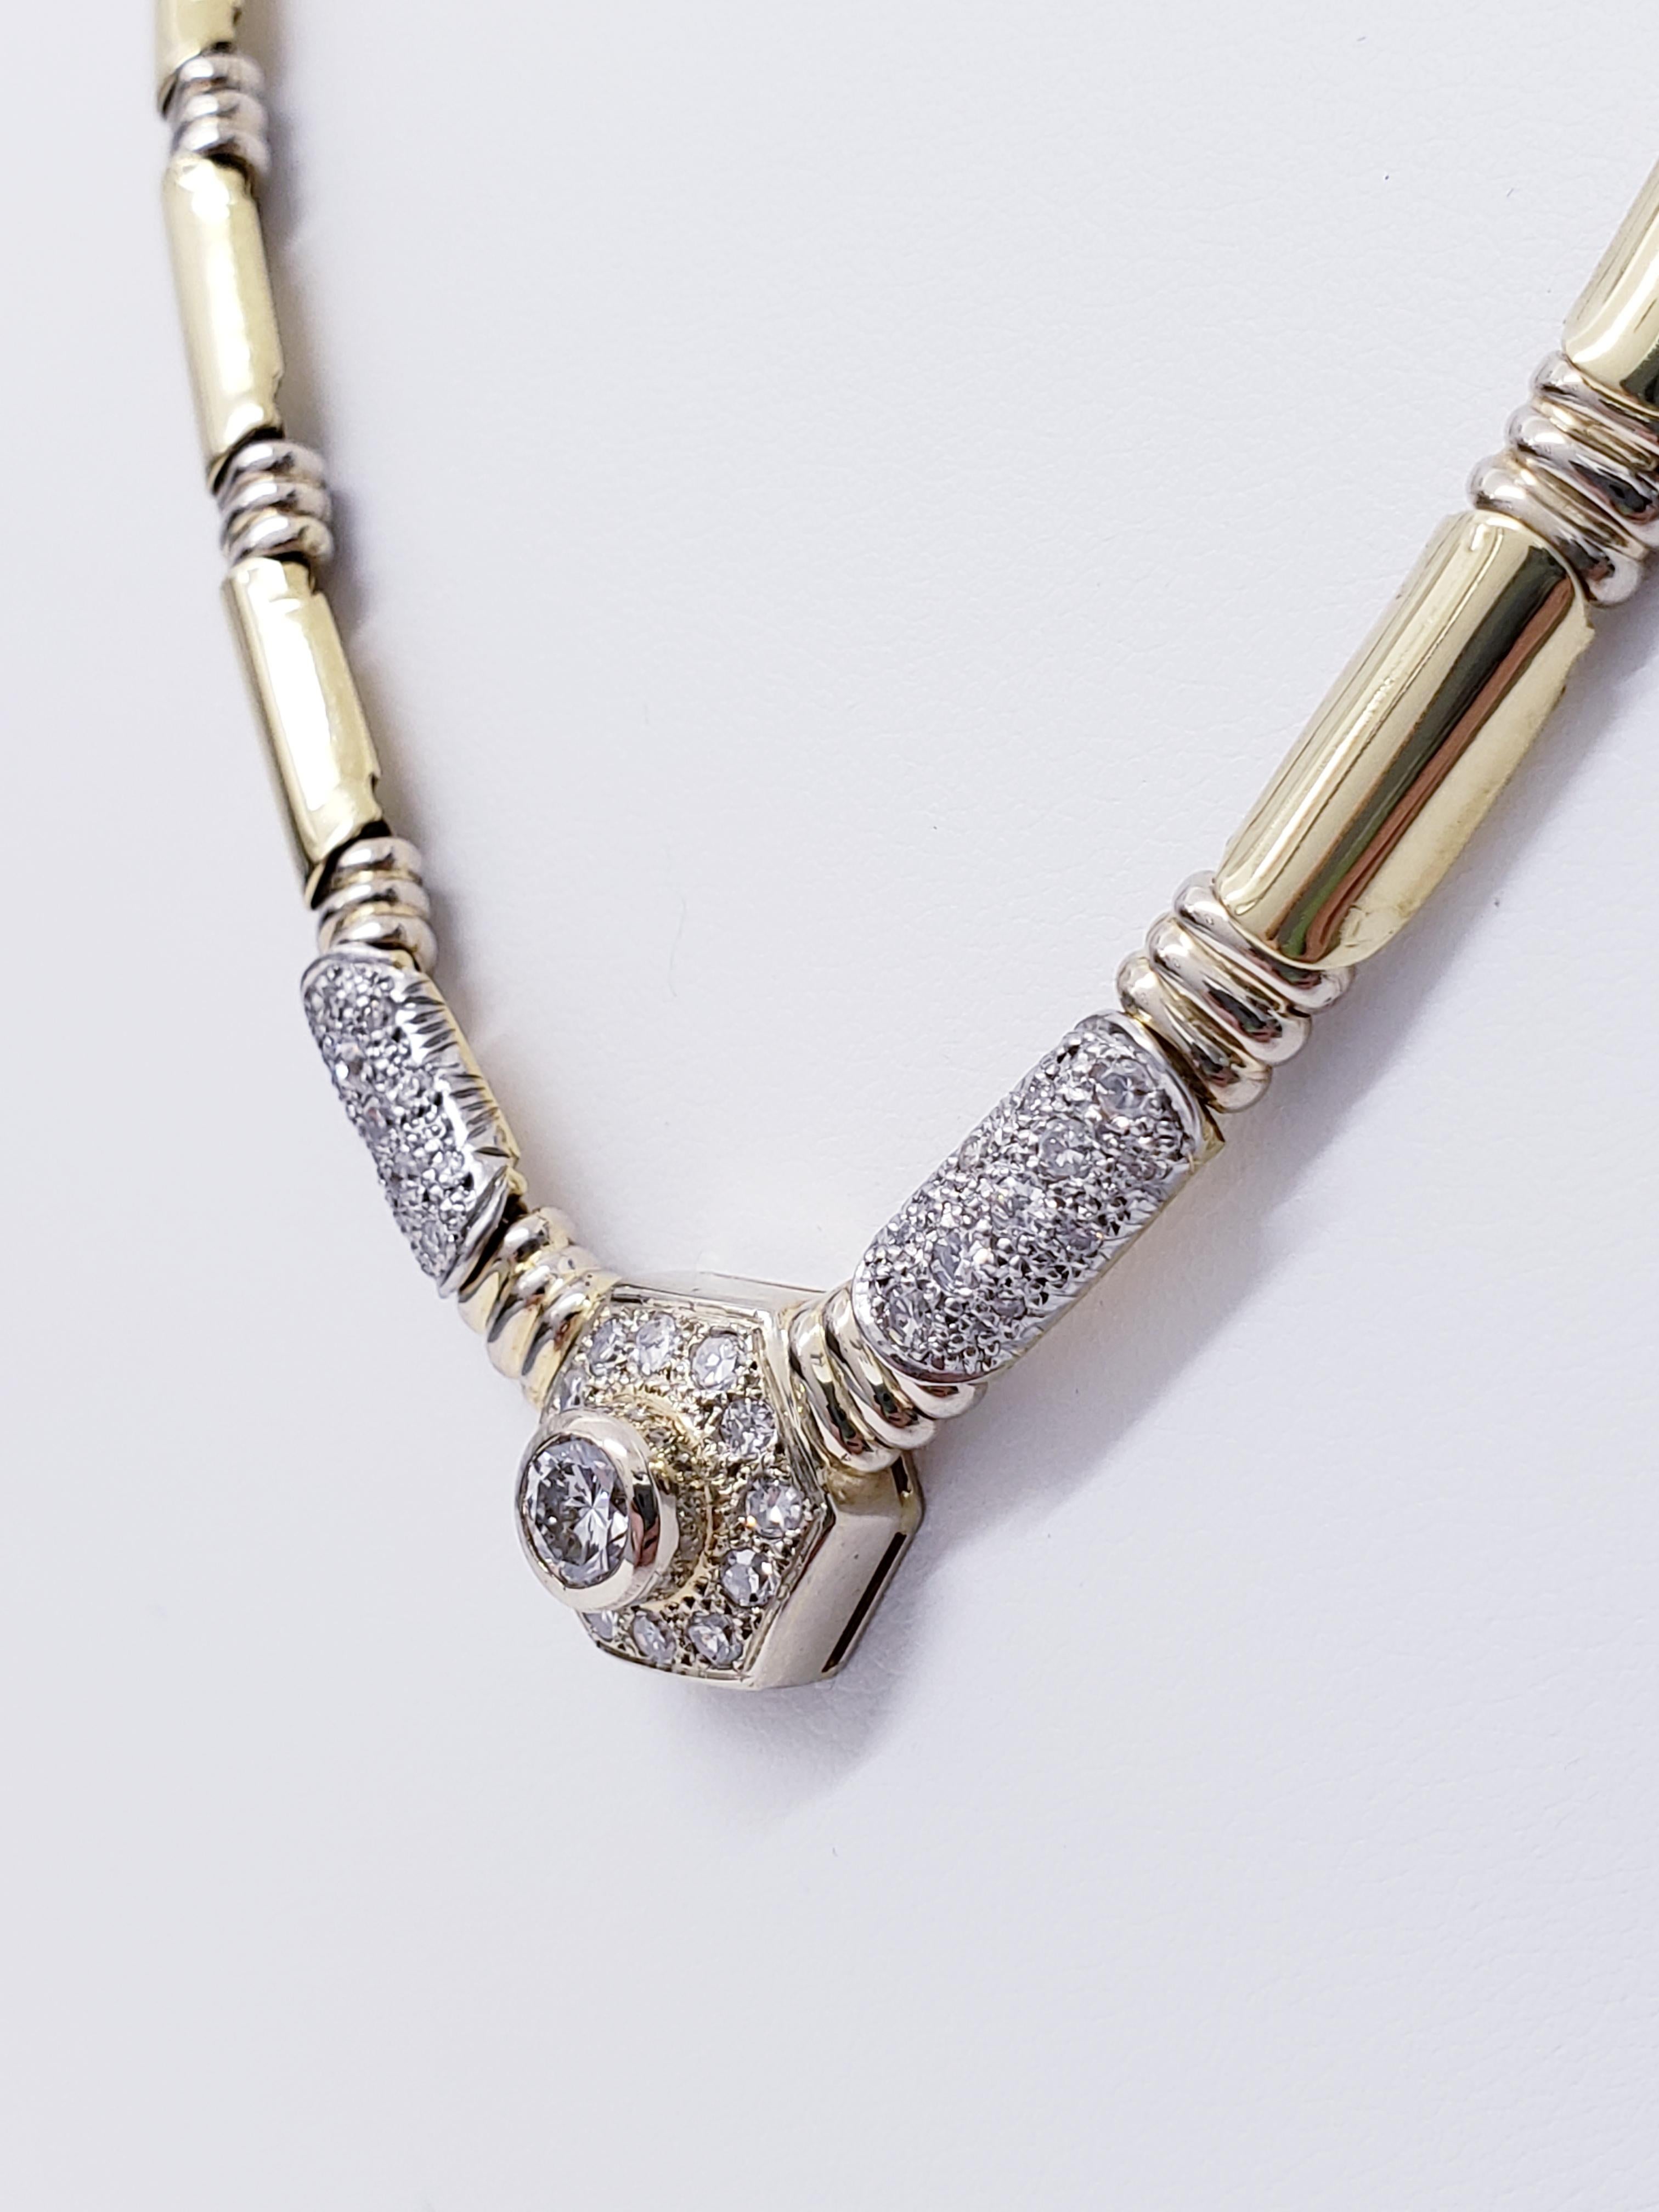 Vintage 4.00tcw Diamond Bamboo Necklace
The necklace has a nice bamboo design throughout featuring yellow gold and white gold to show more details of the bamboo. The diamond center weights approx 0.50ct and the side diamonds total approx 3.50ct. The